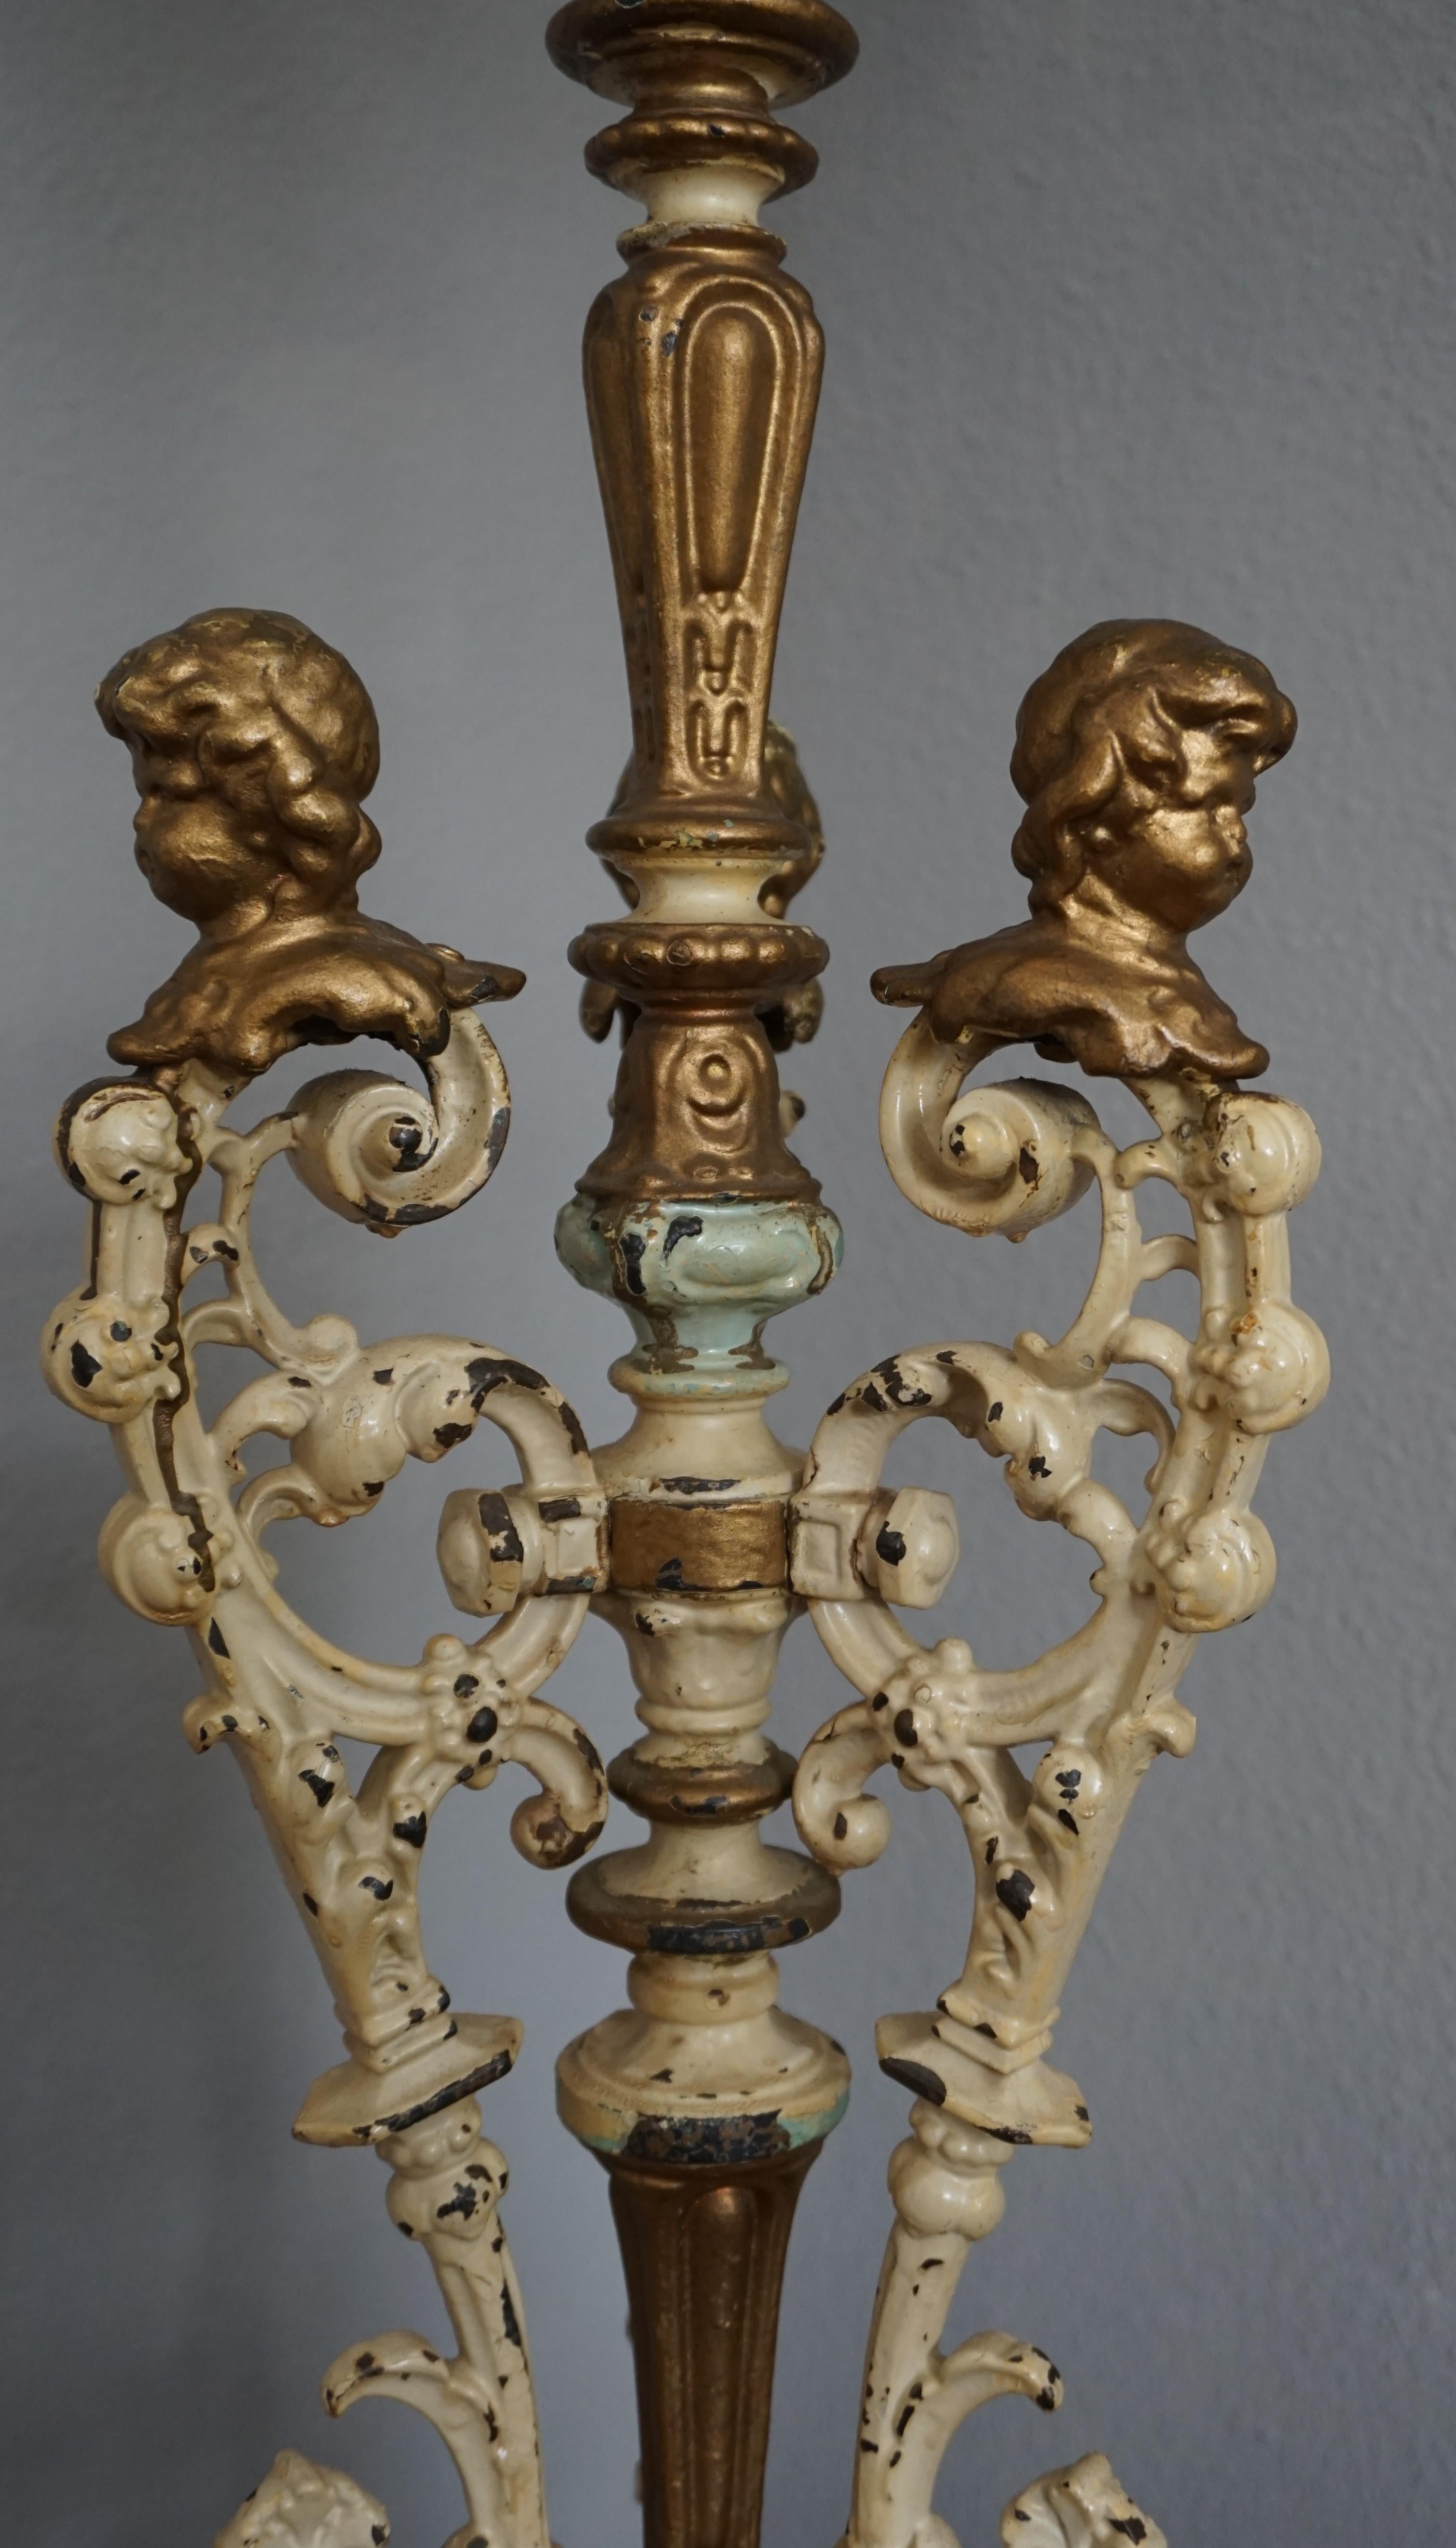 European Antique and Painted Cast Iron Baroque Revival Floor Lamp w. Putti Bust Sculpture For Sale